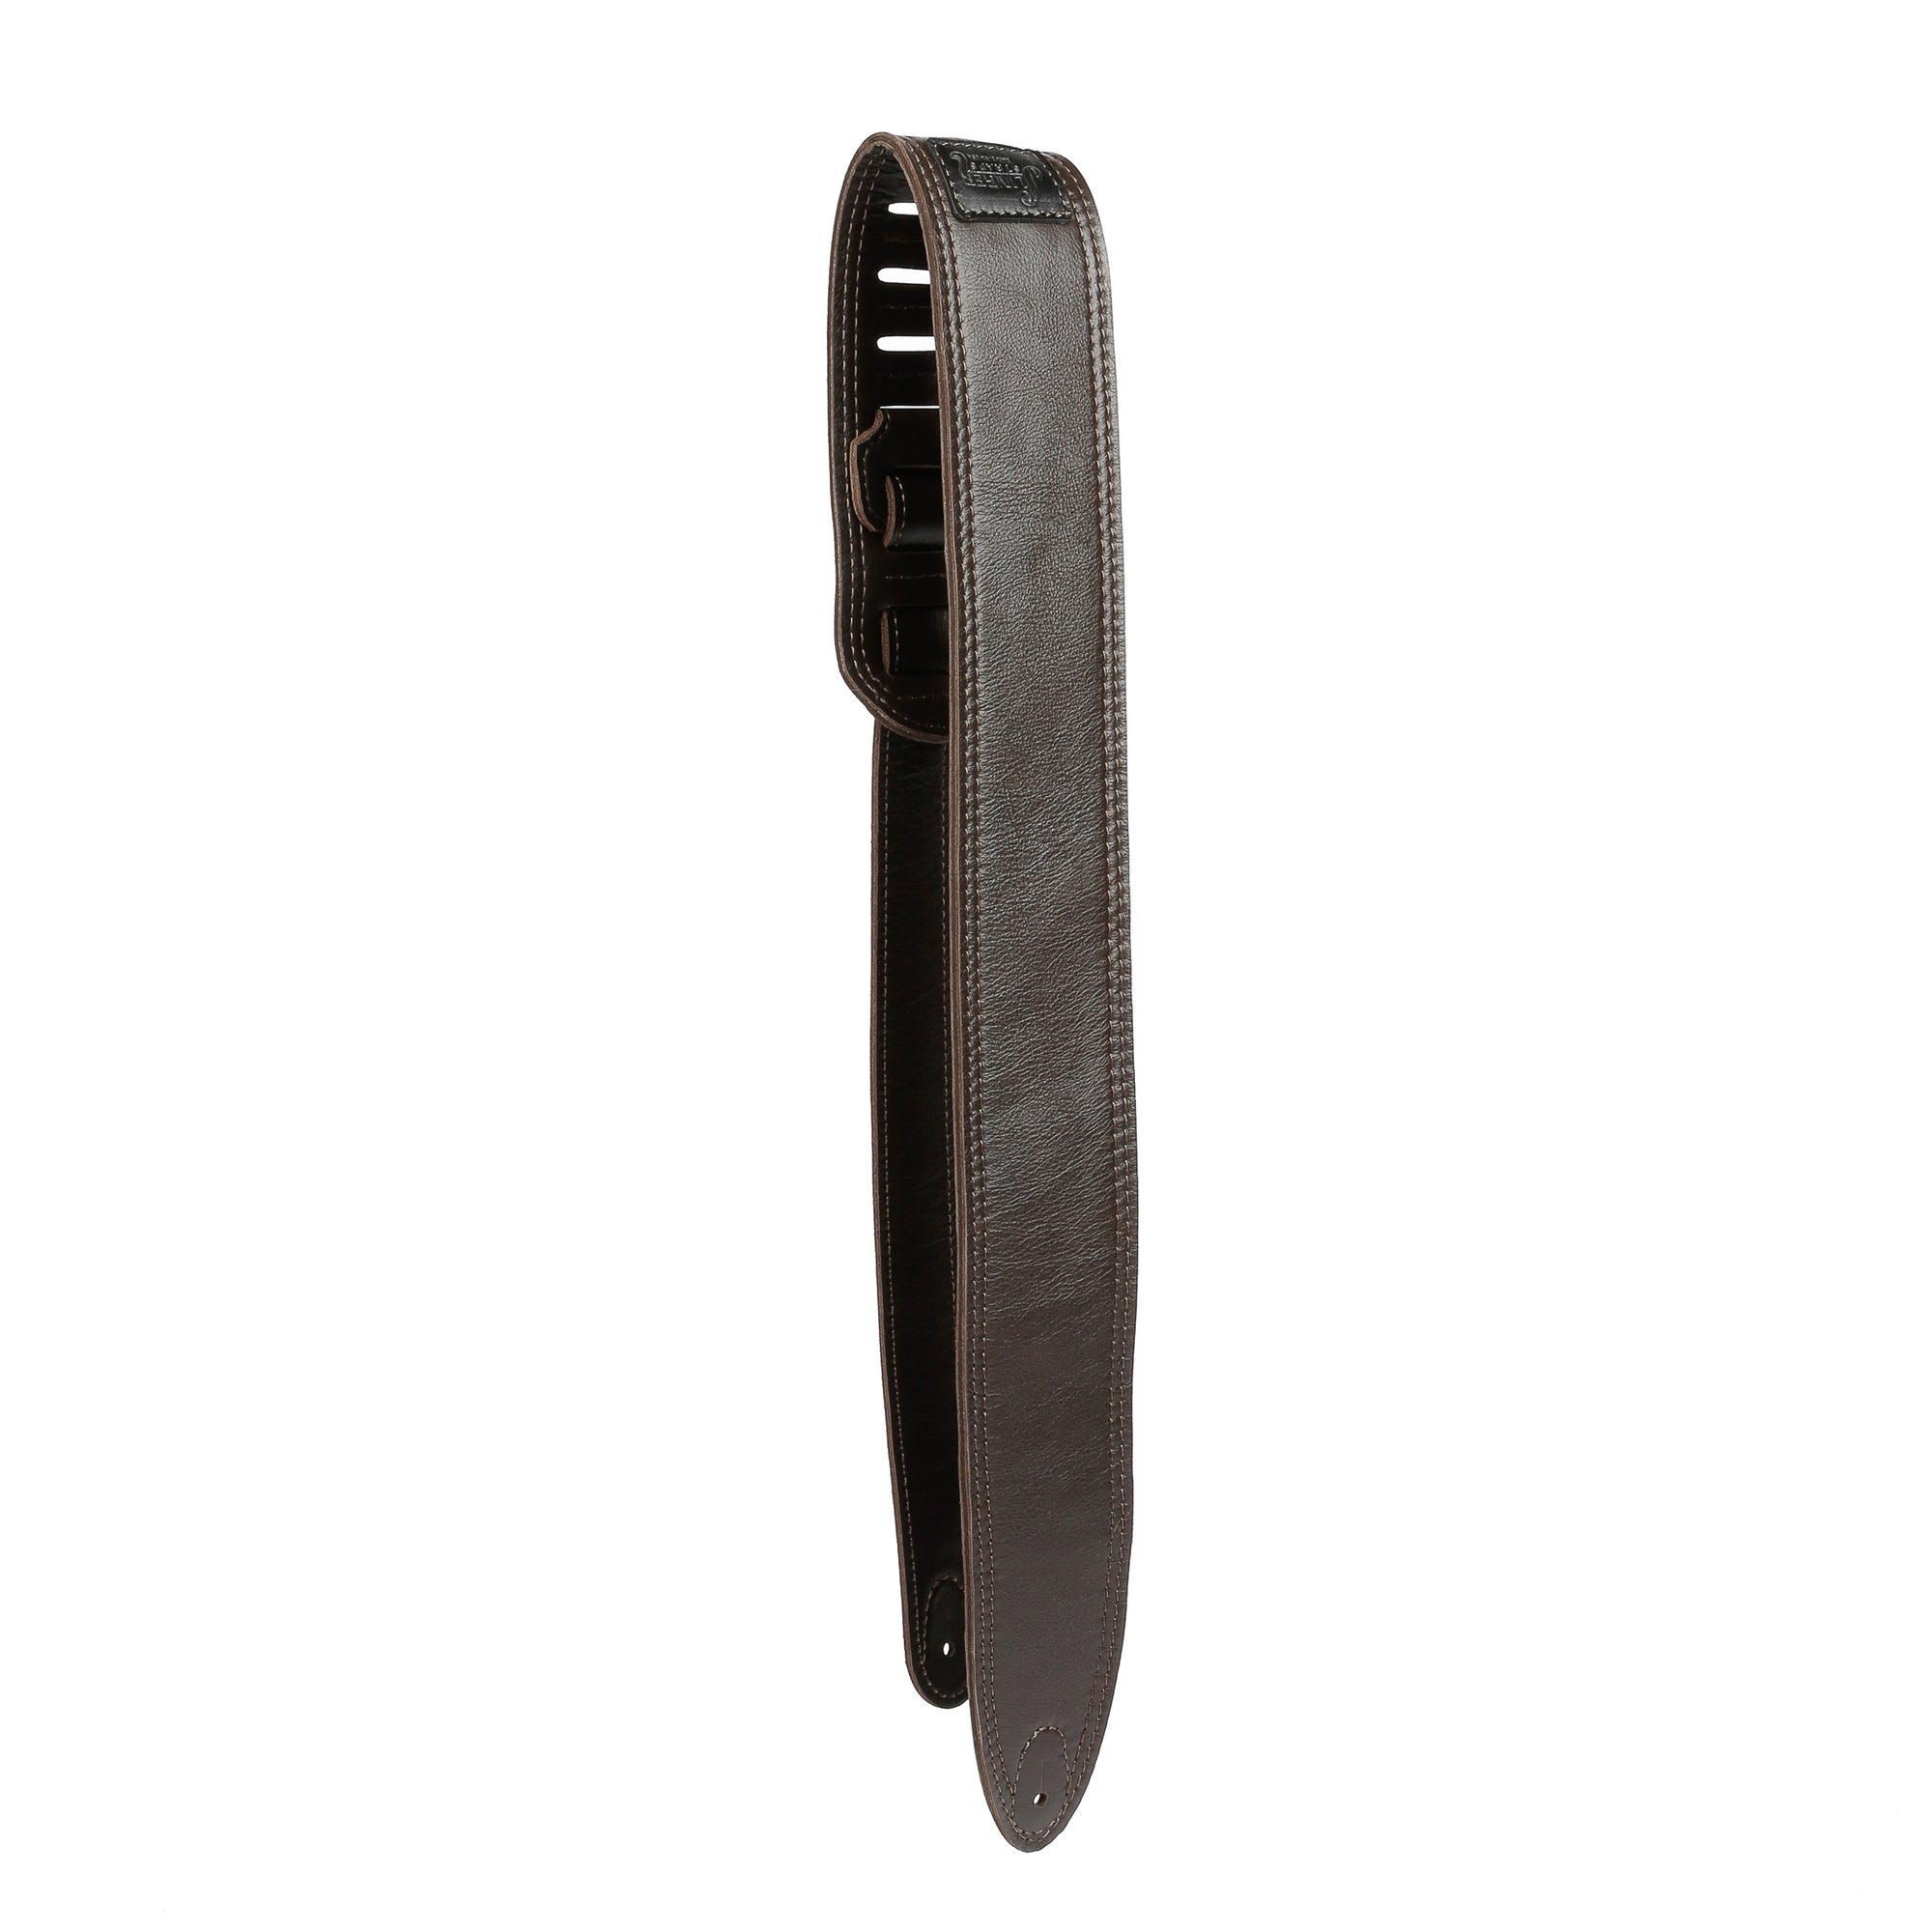 3-inch wide brown leather guitar strap with a double stitched border